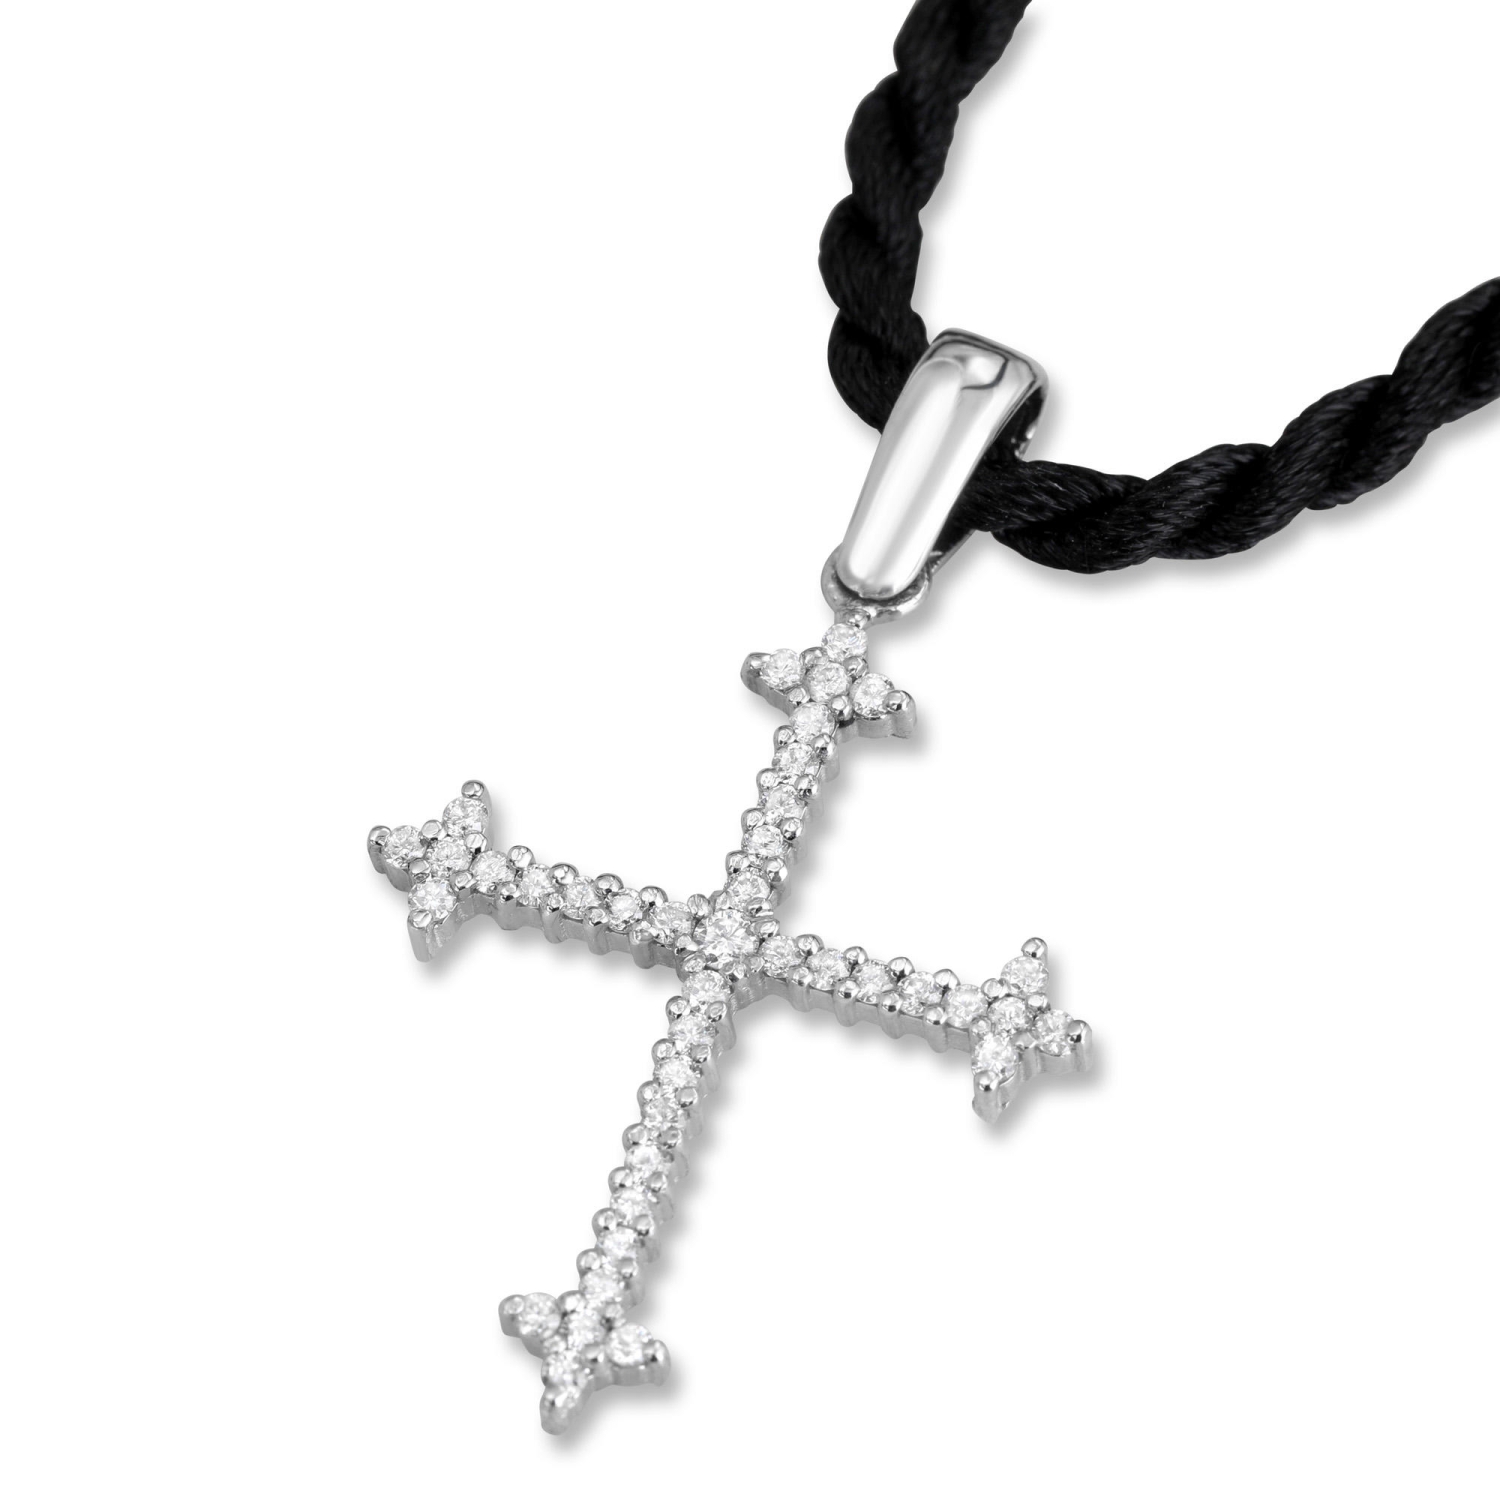 14K White Gold and Diamond Budded Cross Necklace - 1